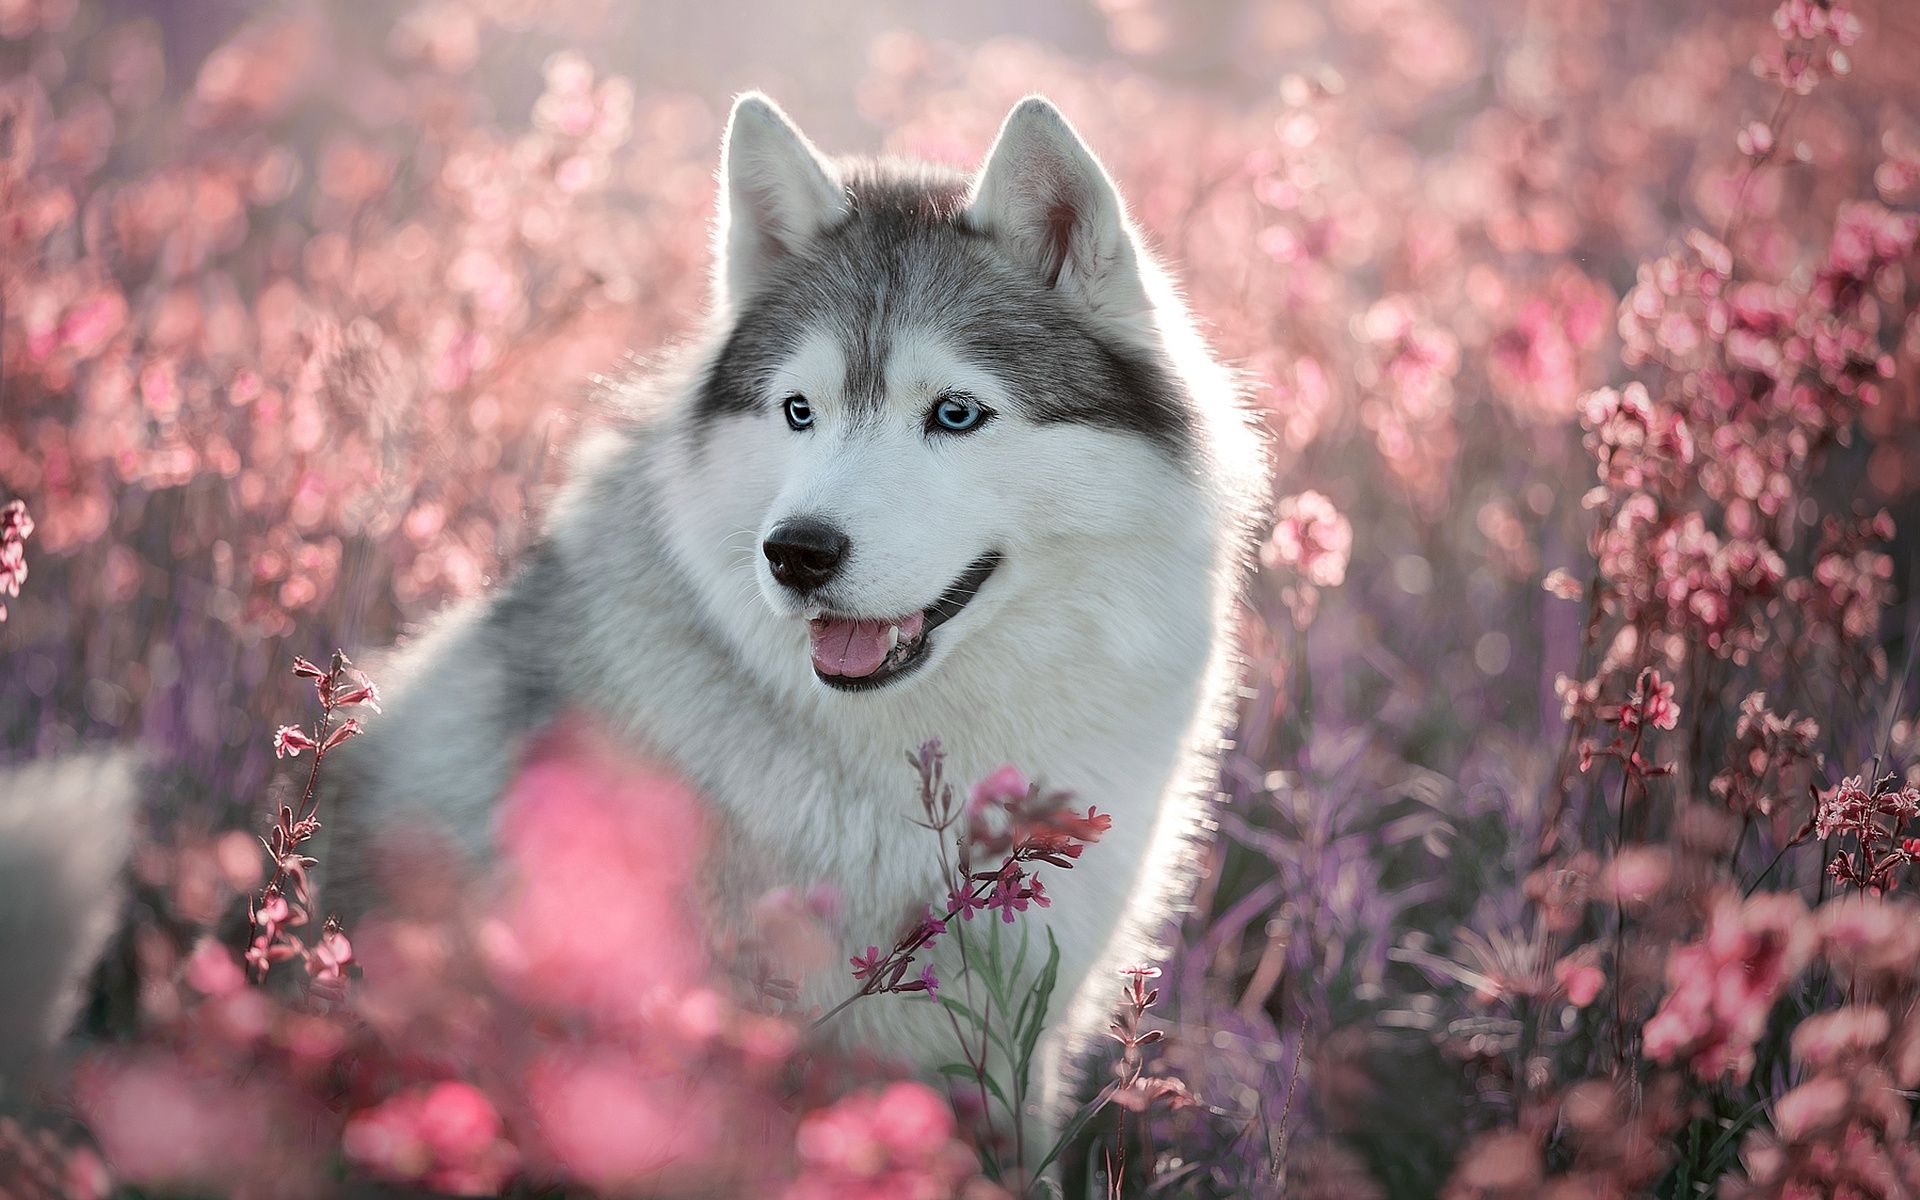 Download wallpaper Husky Dog, spring, cute animals, dog with blue